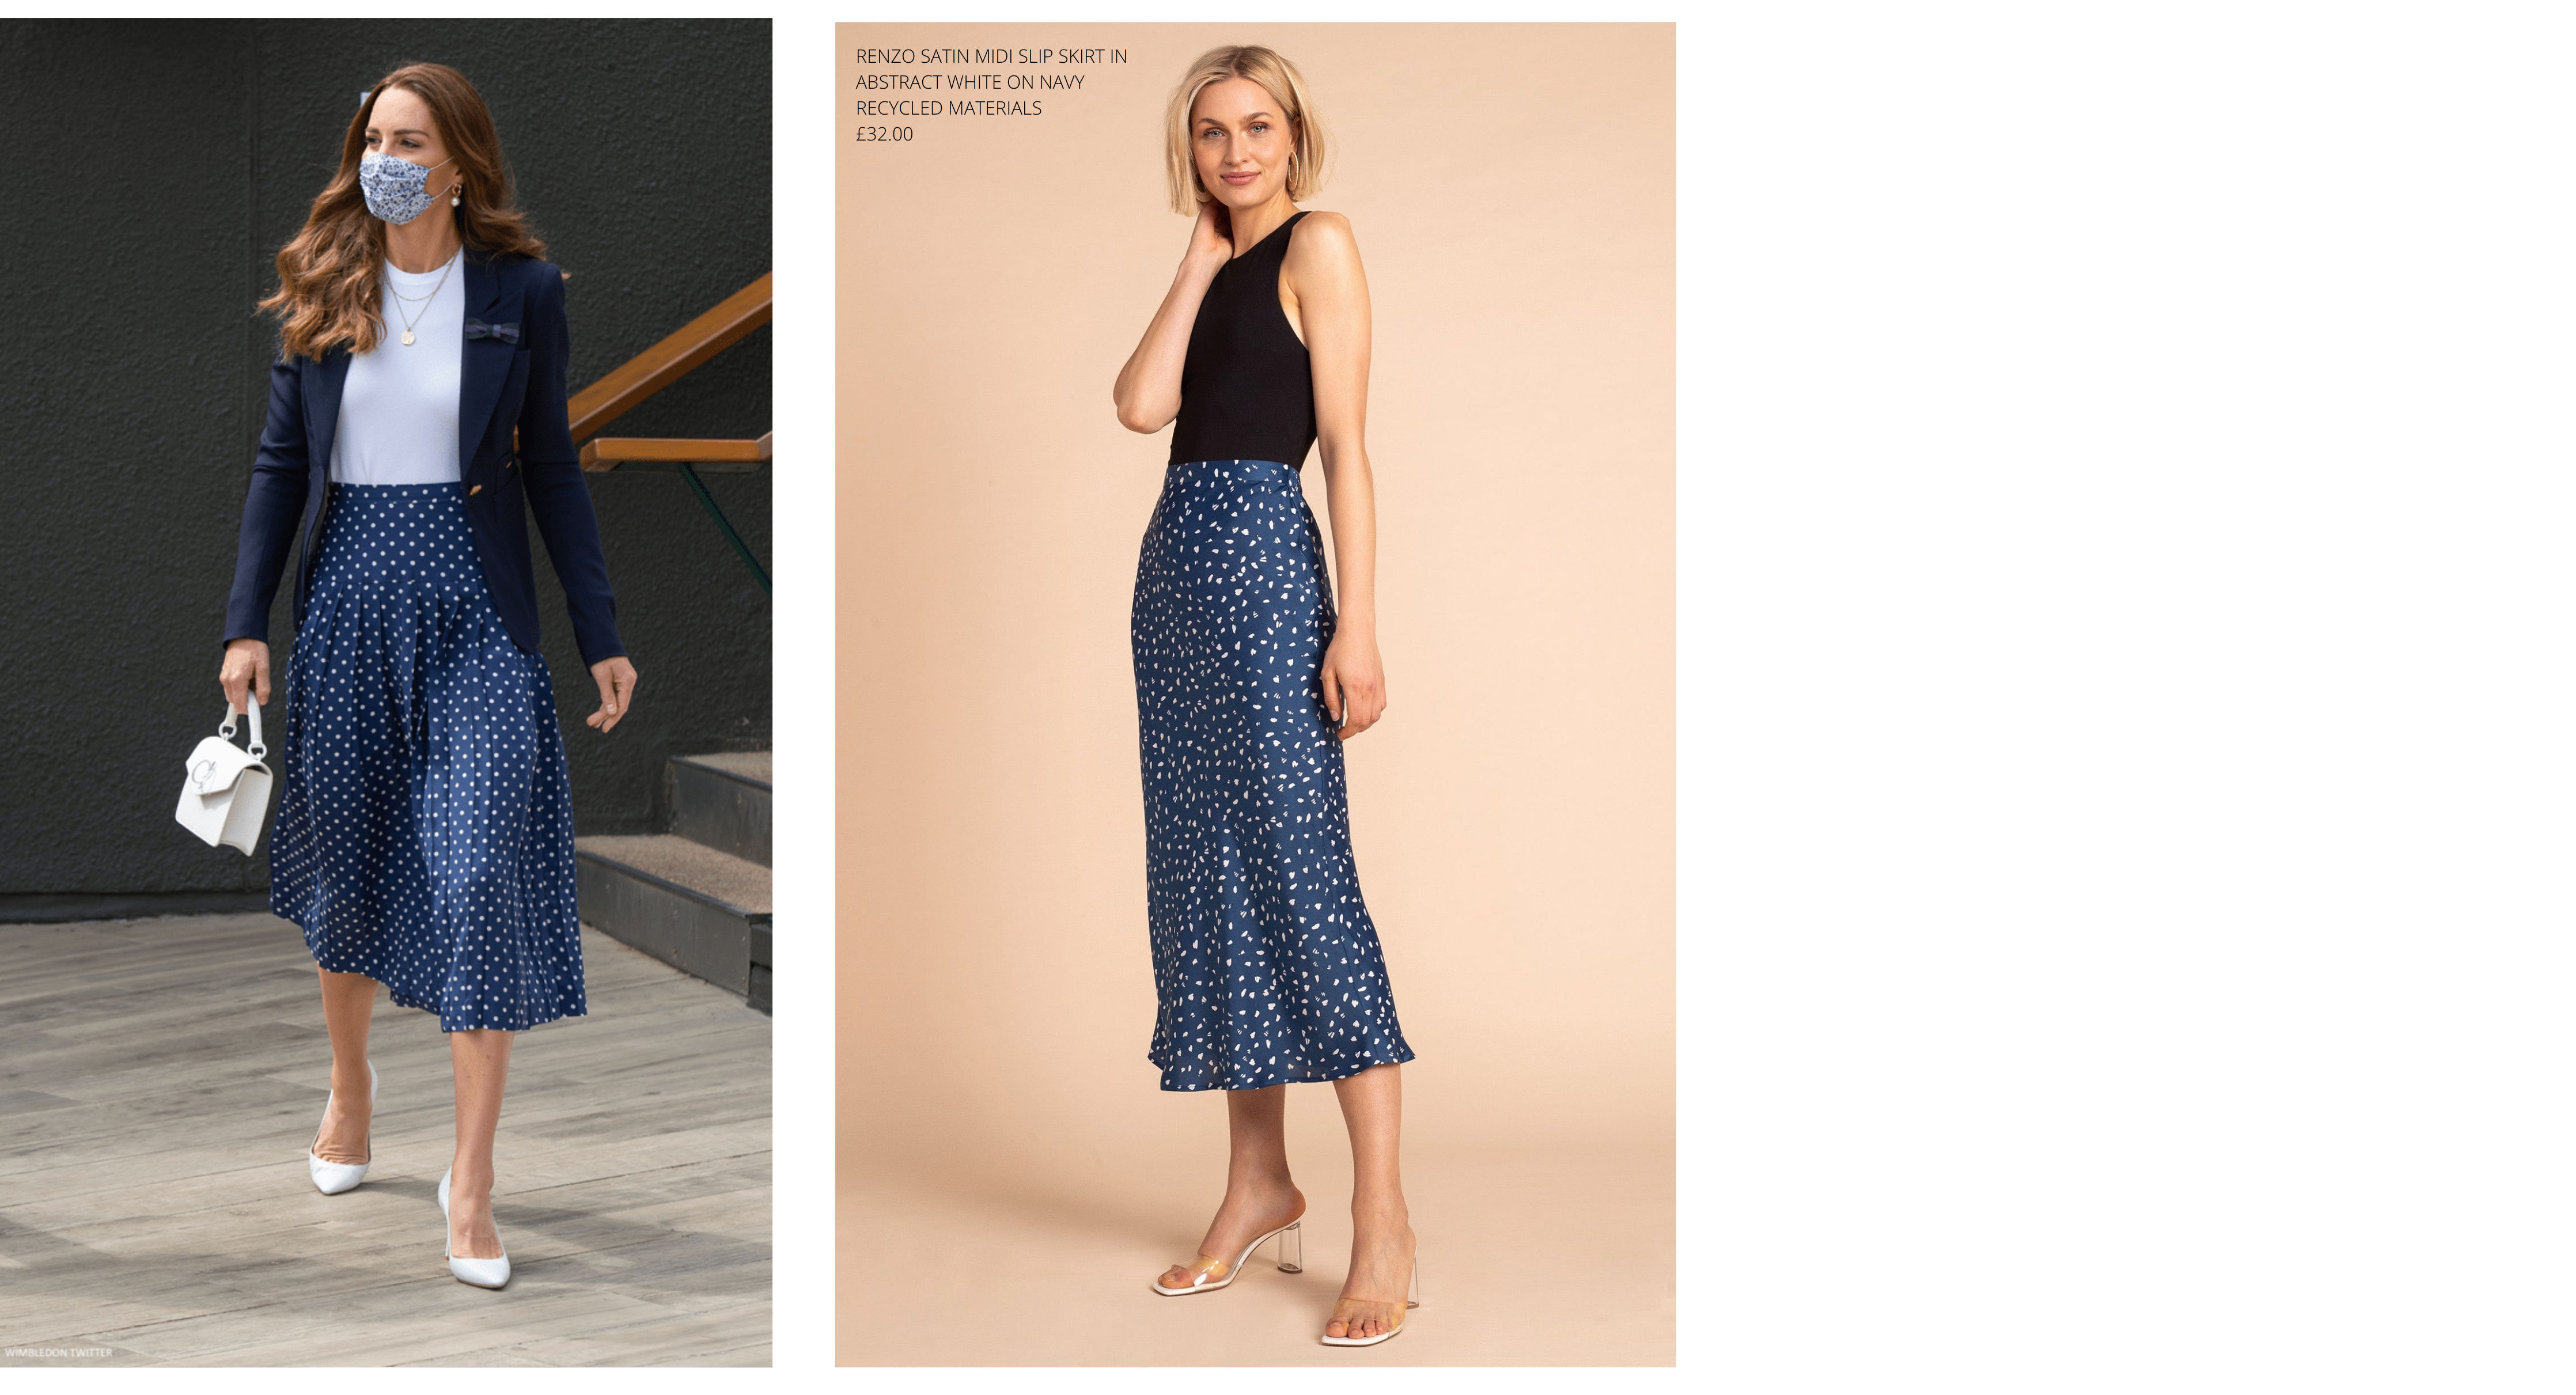 2 images side by side showing Kate Middleton wearing Polka Dot Skirt which is similar to Dancing Leopard Renzo Skirt worn by model